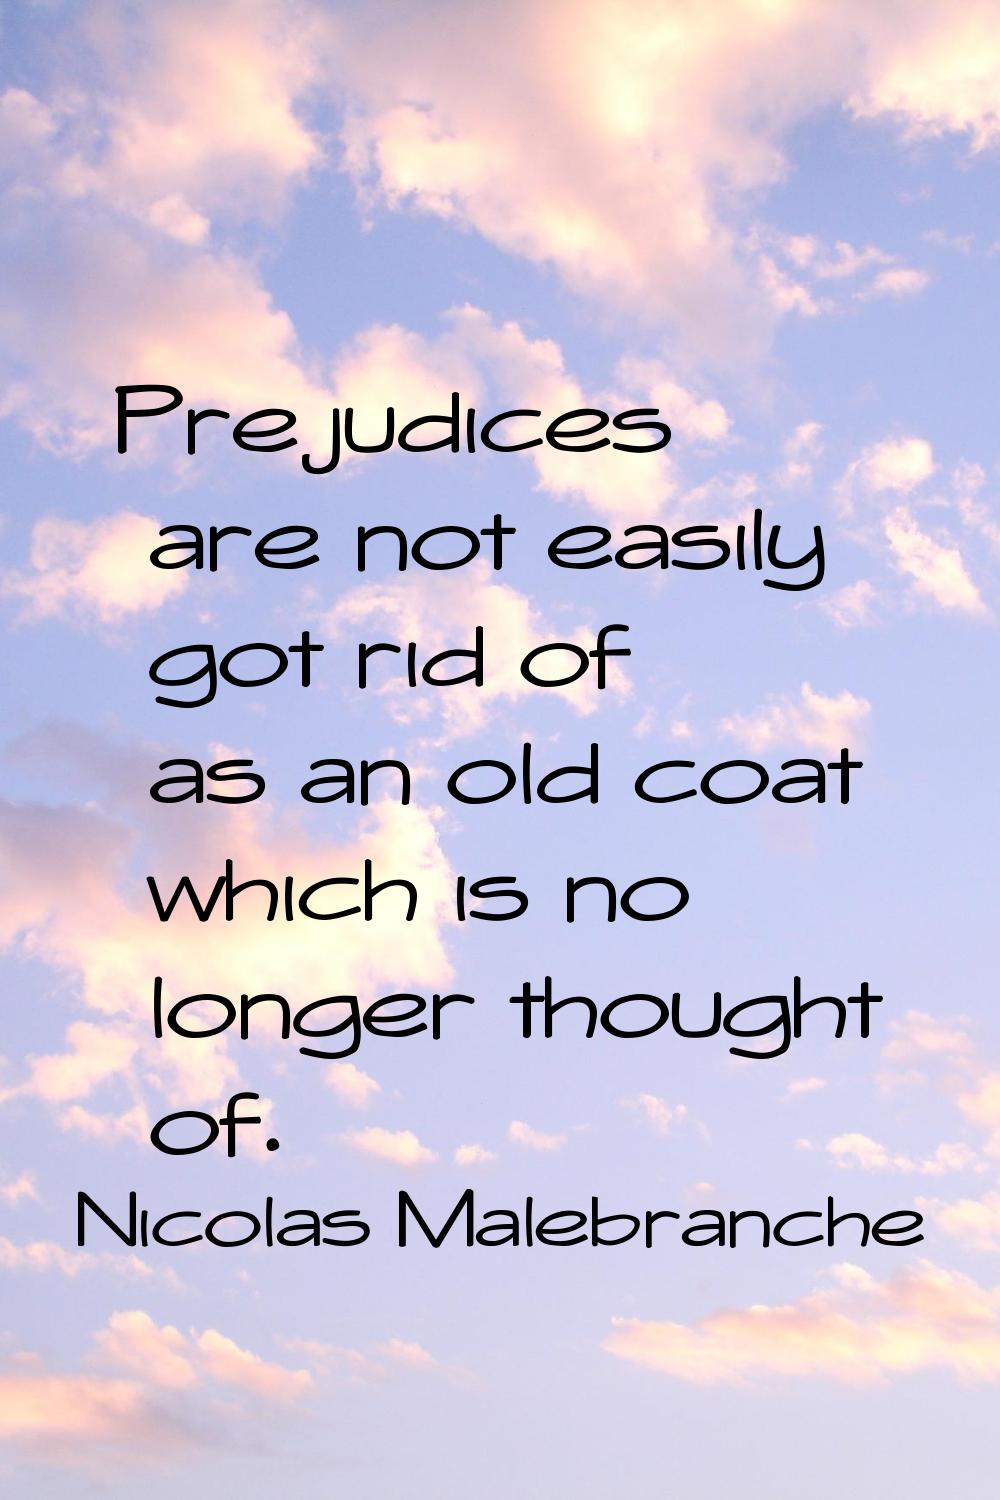 Prejudices are not easily got rid of as an old coat which is no longer thought of.